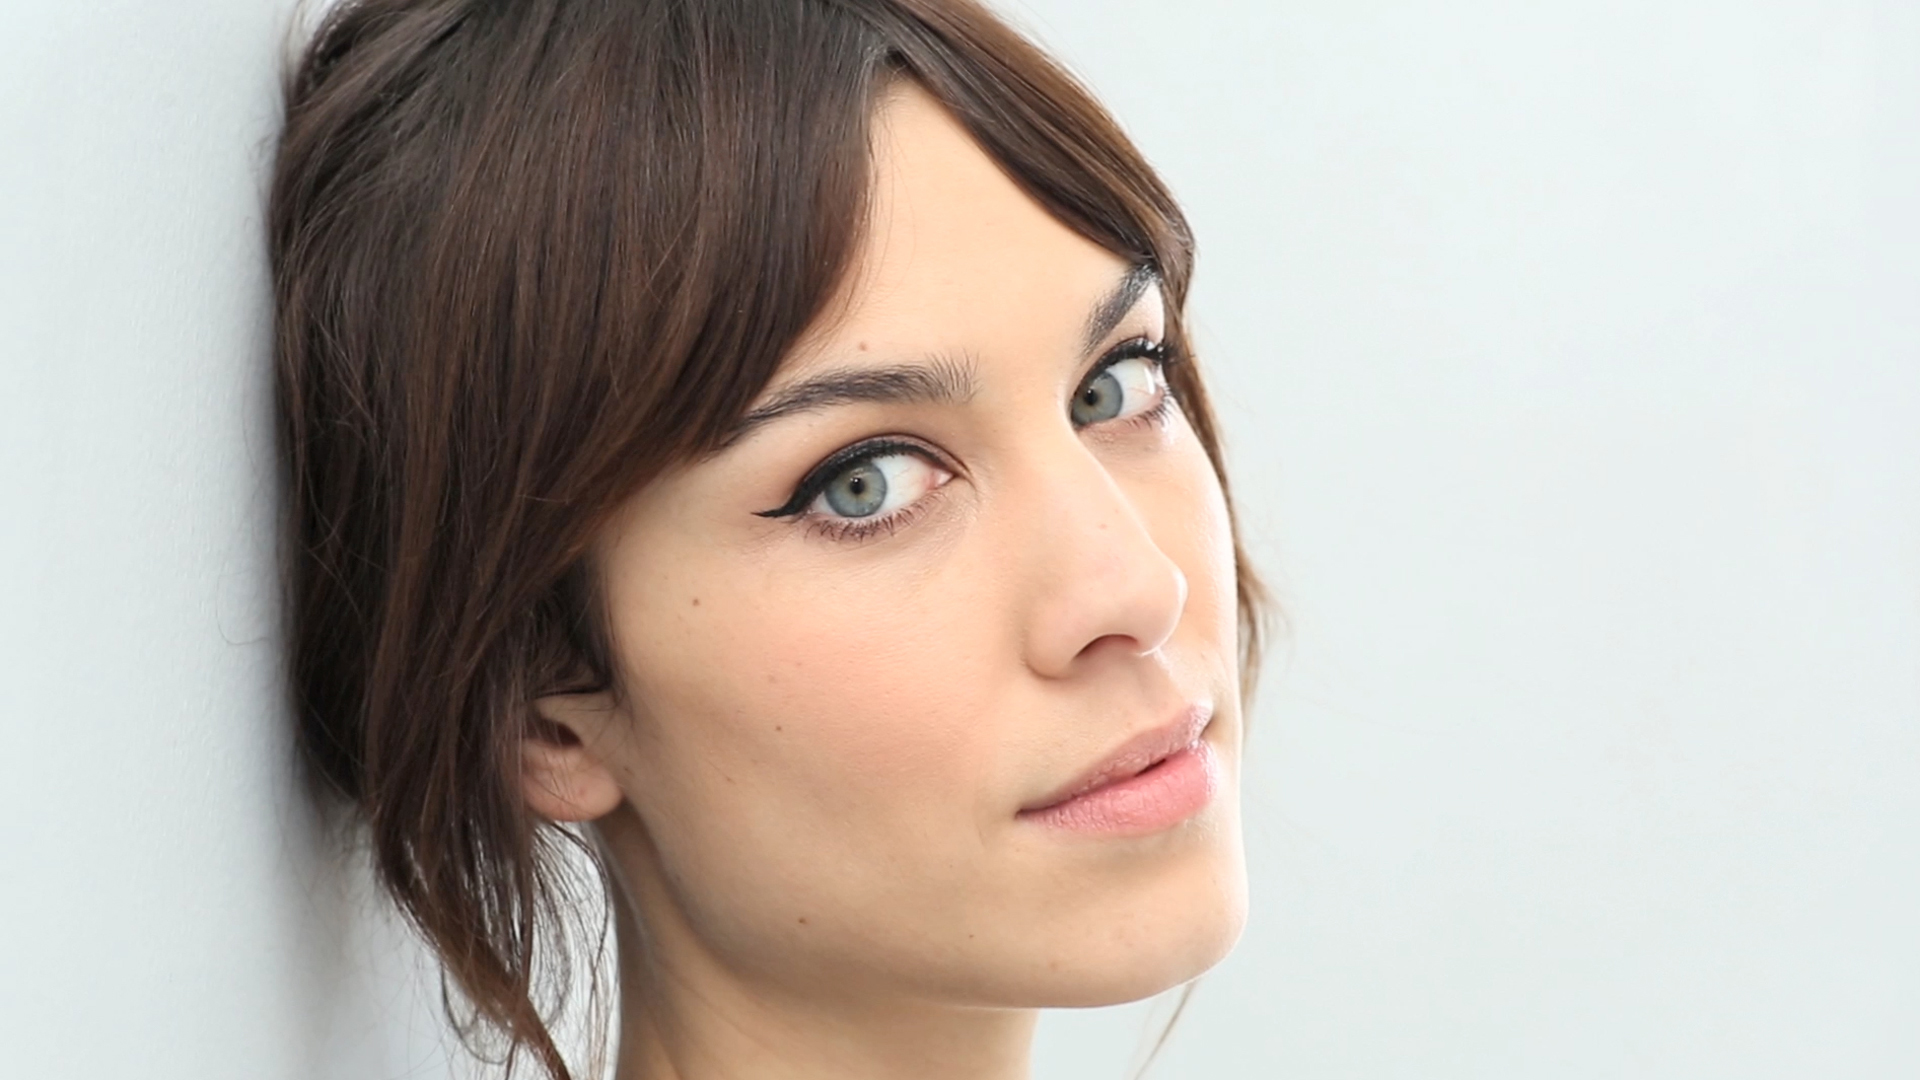 Alexa Chung Backgrounds, Compatible - PC, Mobile, Gadgets| 1920x1080 px